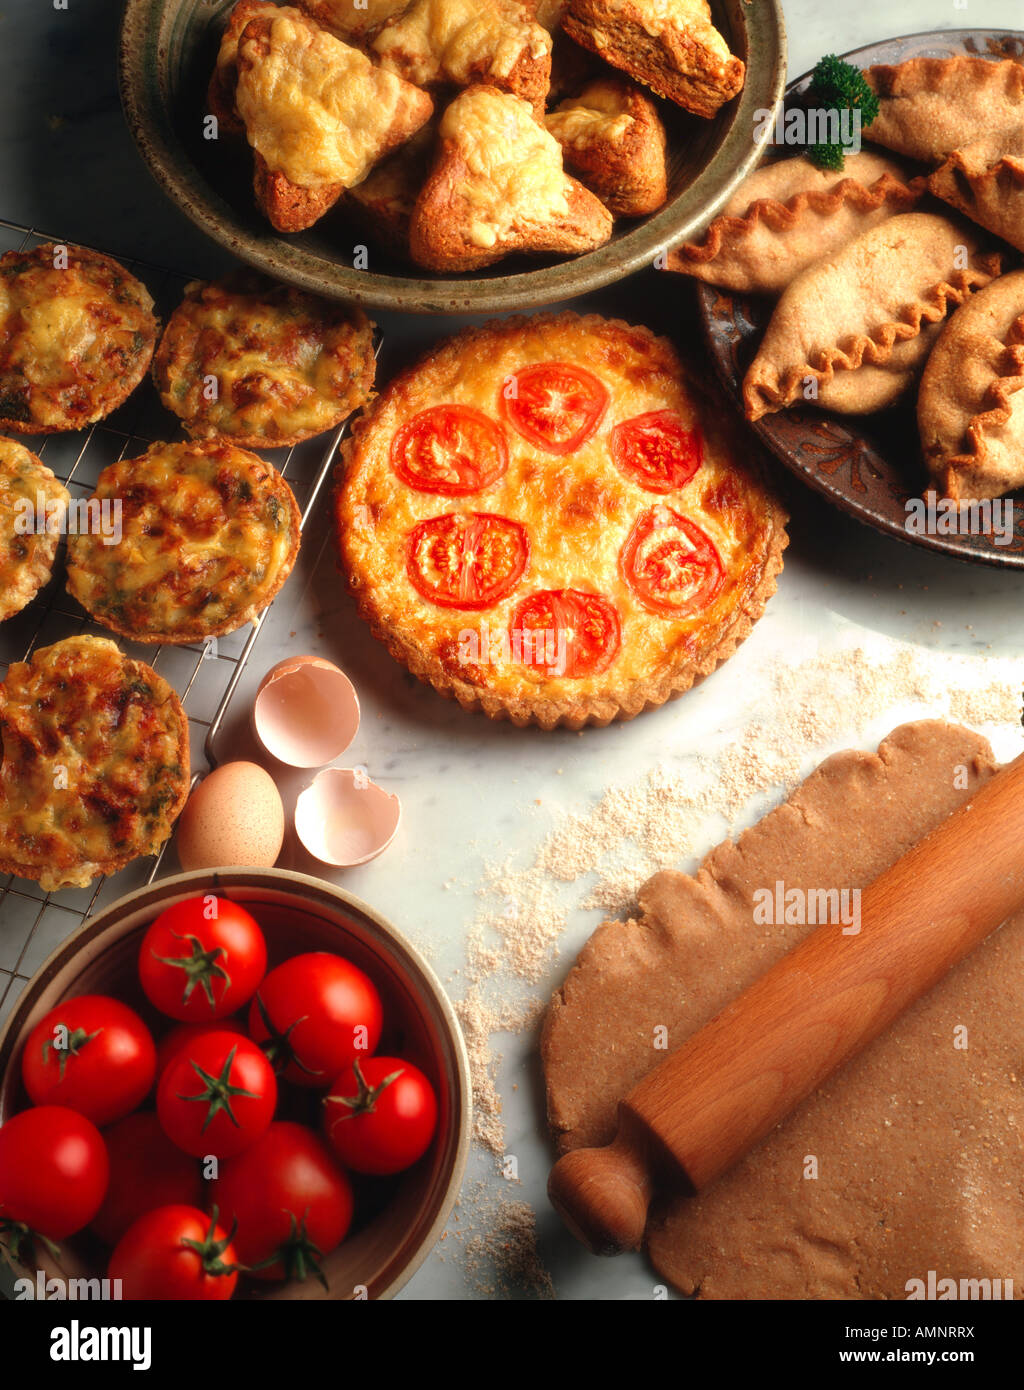 Wholefood and organic Whole wheat Quiche, pies, tarts and vegetarian pasties on a marble background Stock Photo